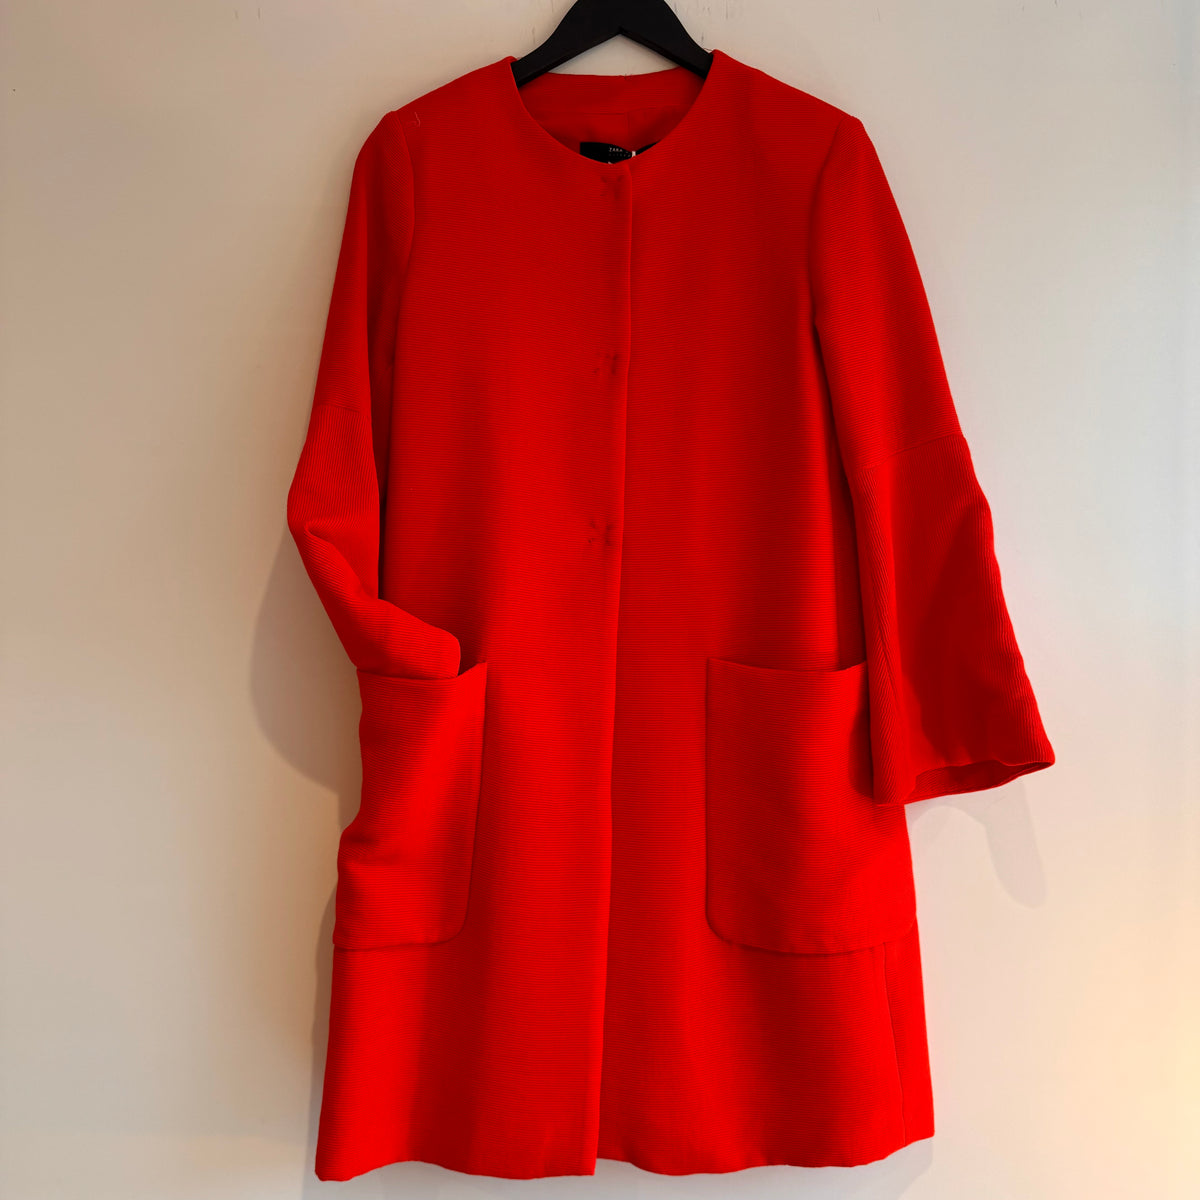 Zara Occasion Dress Coat Red Size Small